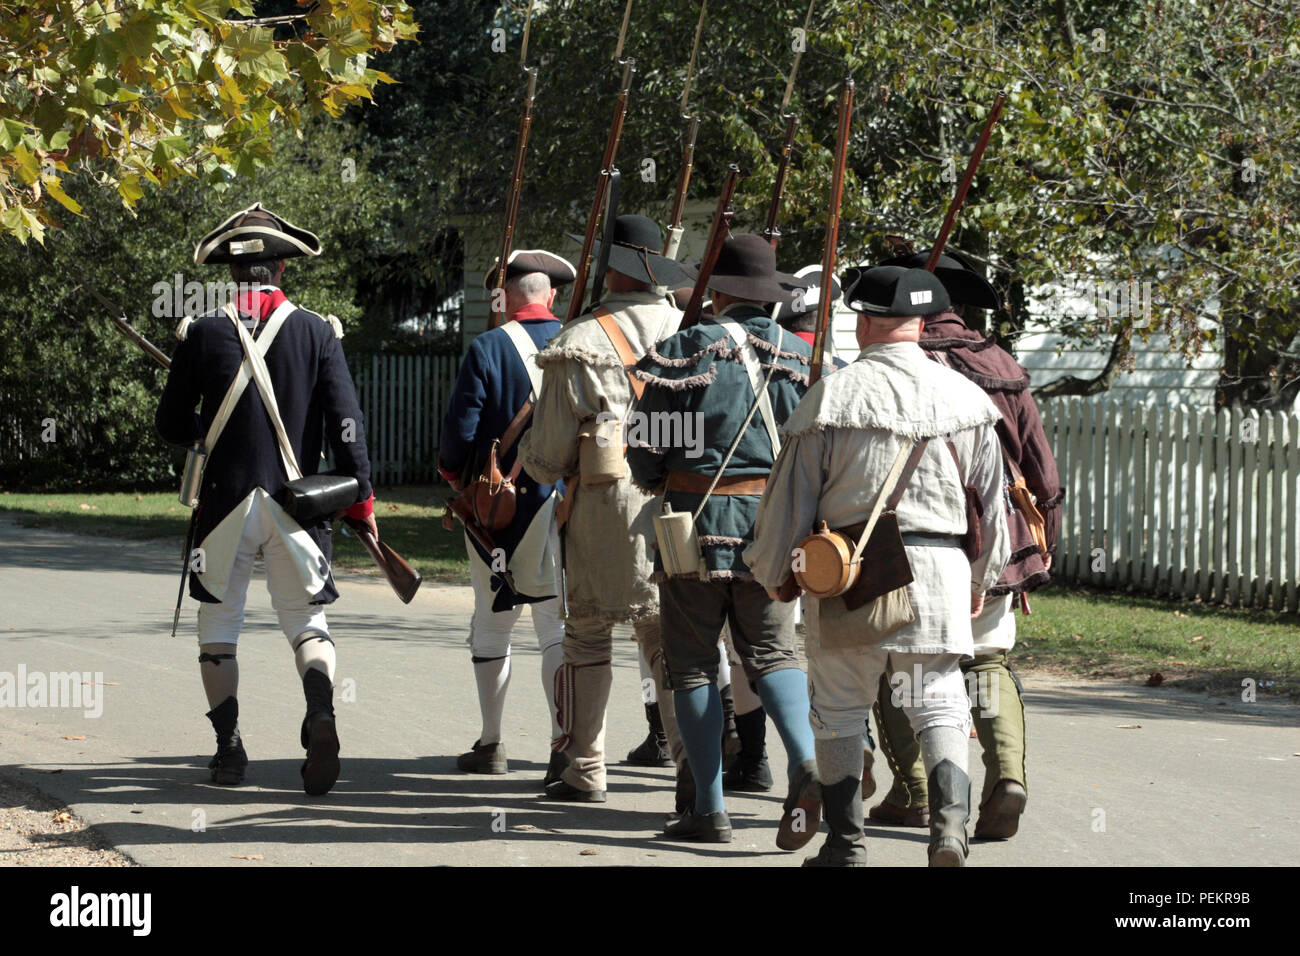 Continental army during the American Revolution. Historical reenactment at Colonial Williamsburg, Virginia, USA Stock Photo